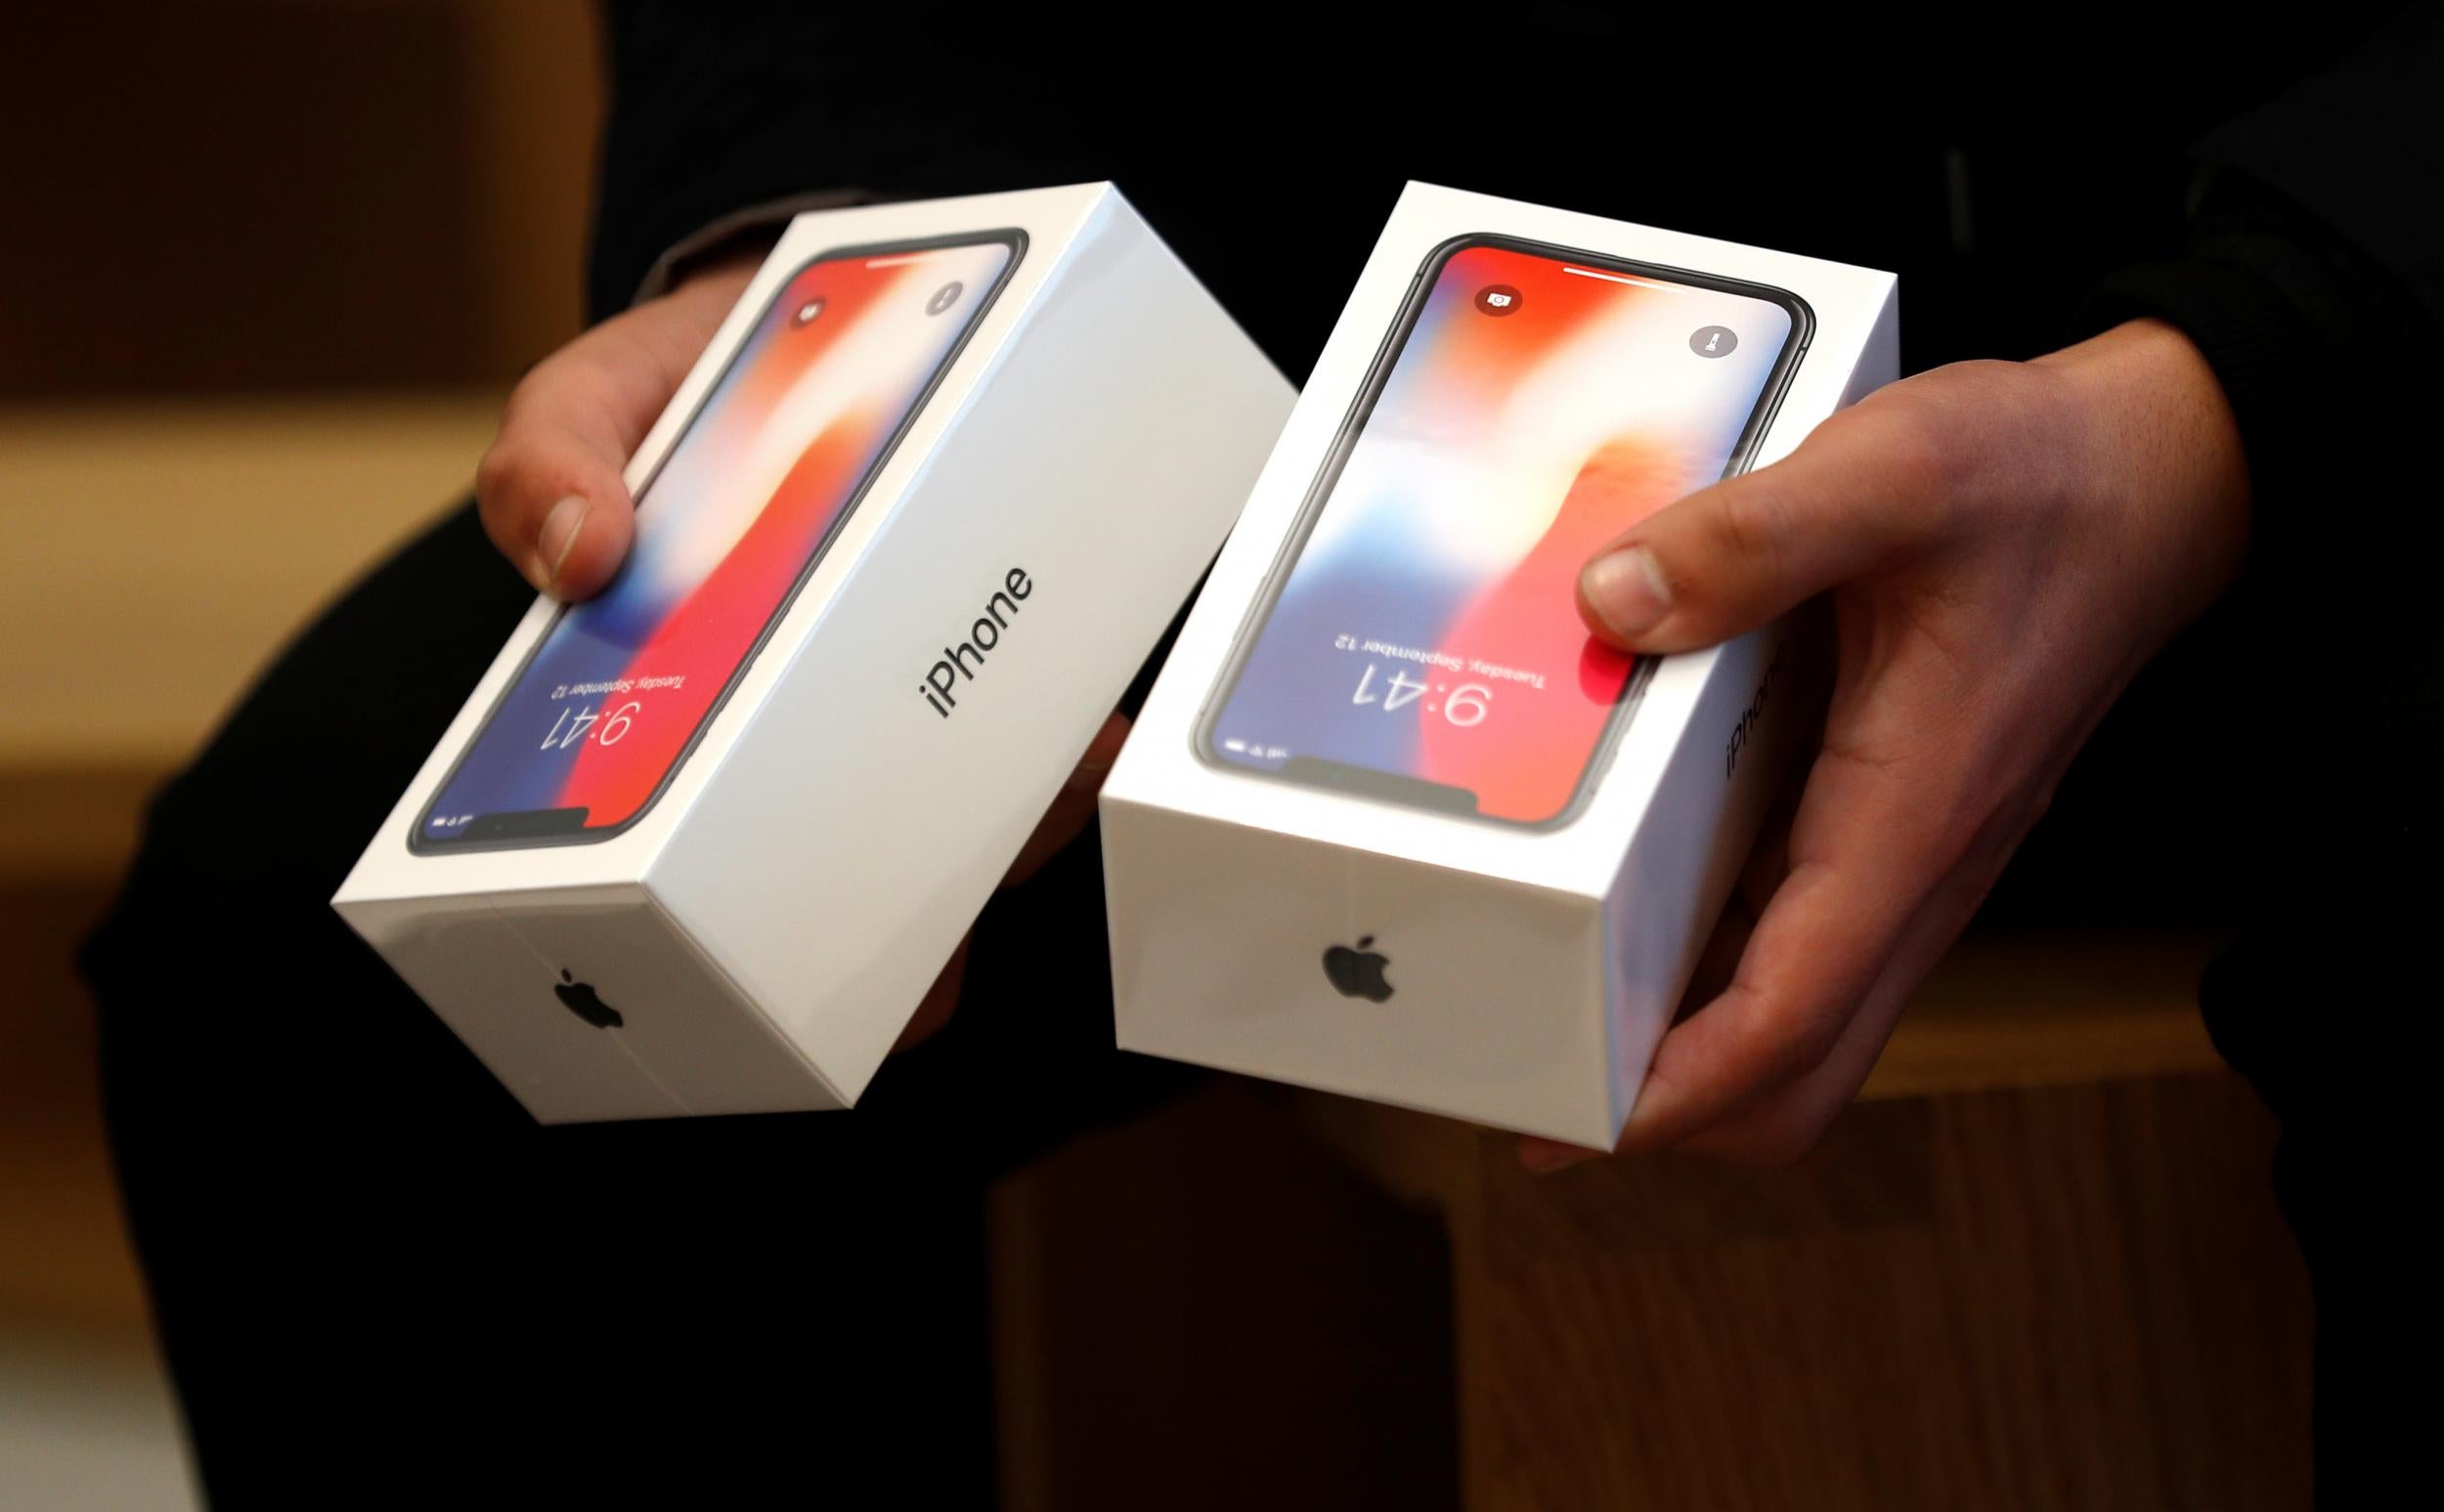 Higher prices for the iPhone X did not make too much of an impact on sales